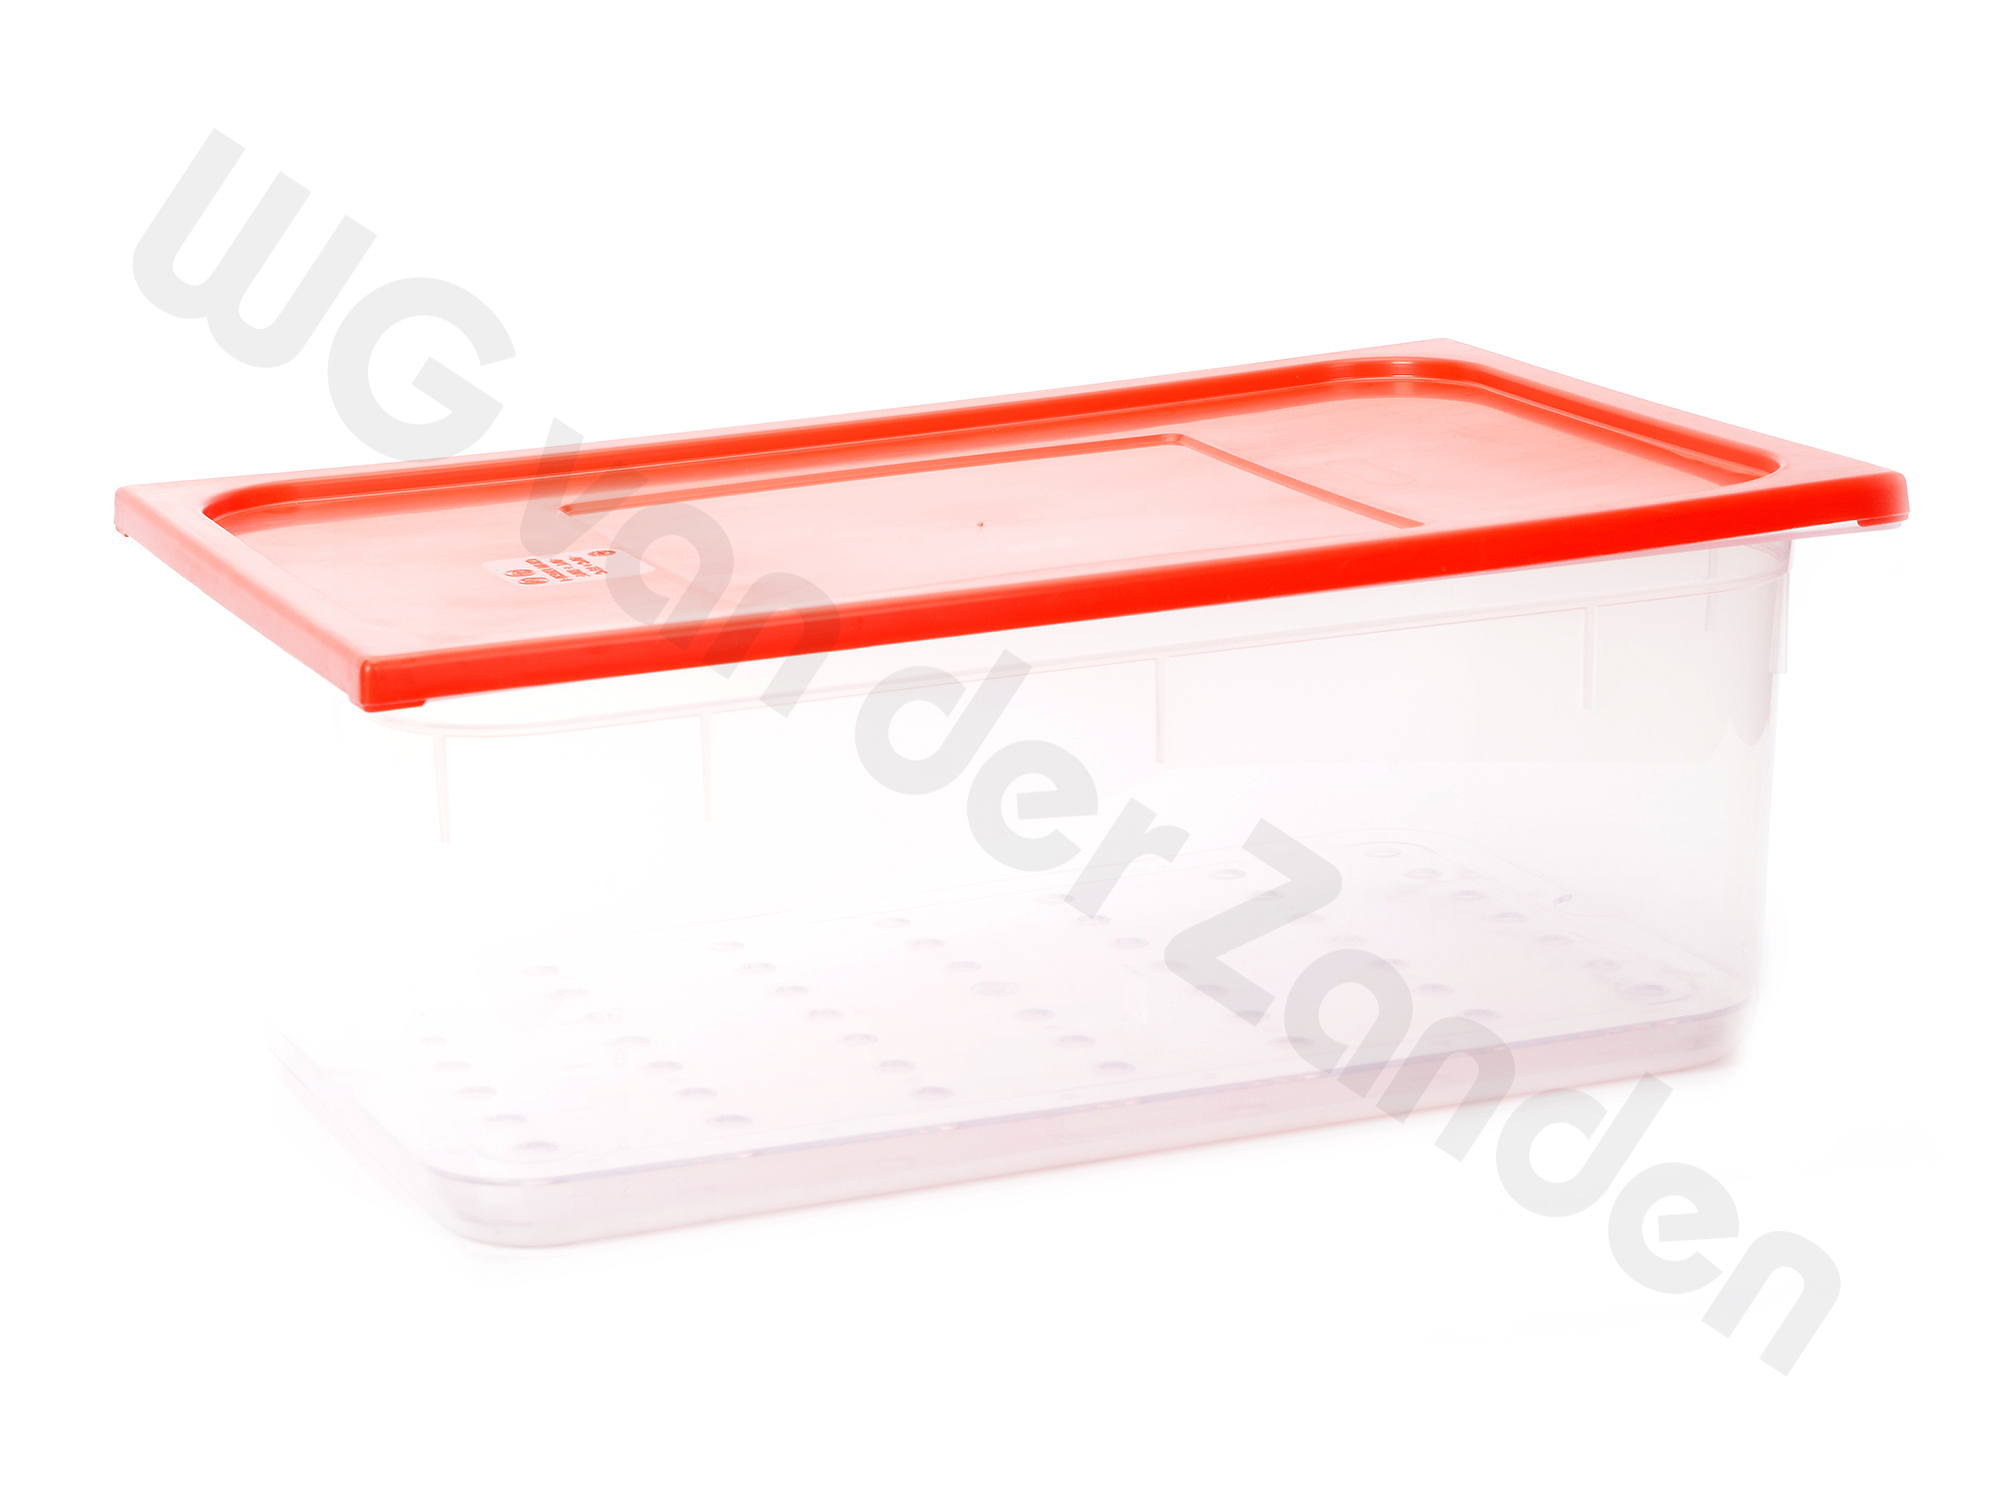 BP1053 THAWING CONTAINER PLASTIC WITH GRID / RED LID 53X32.5X20CM